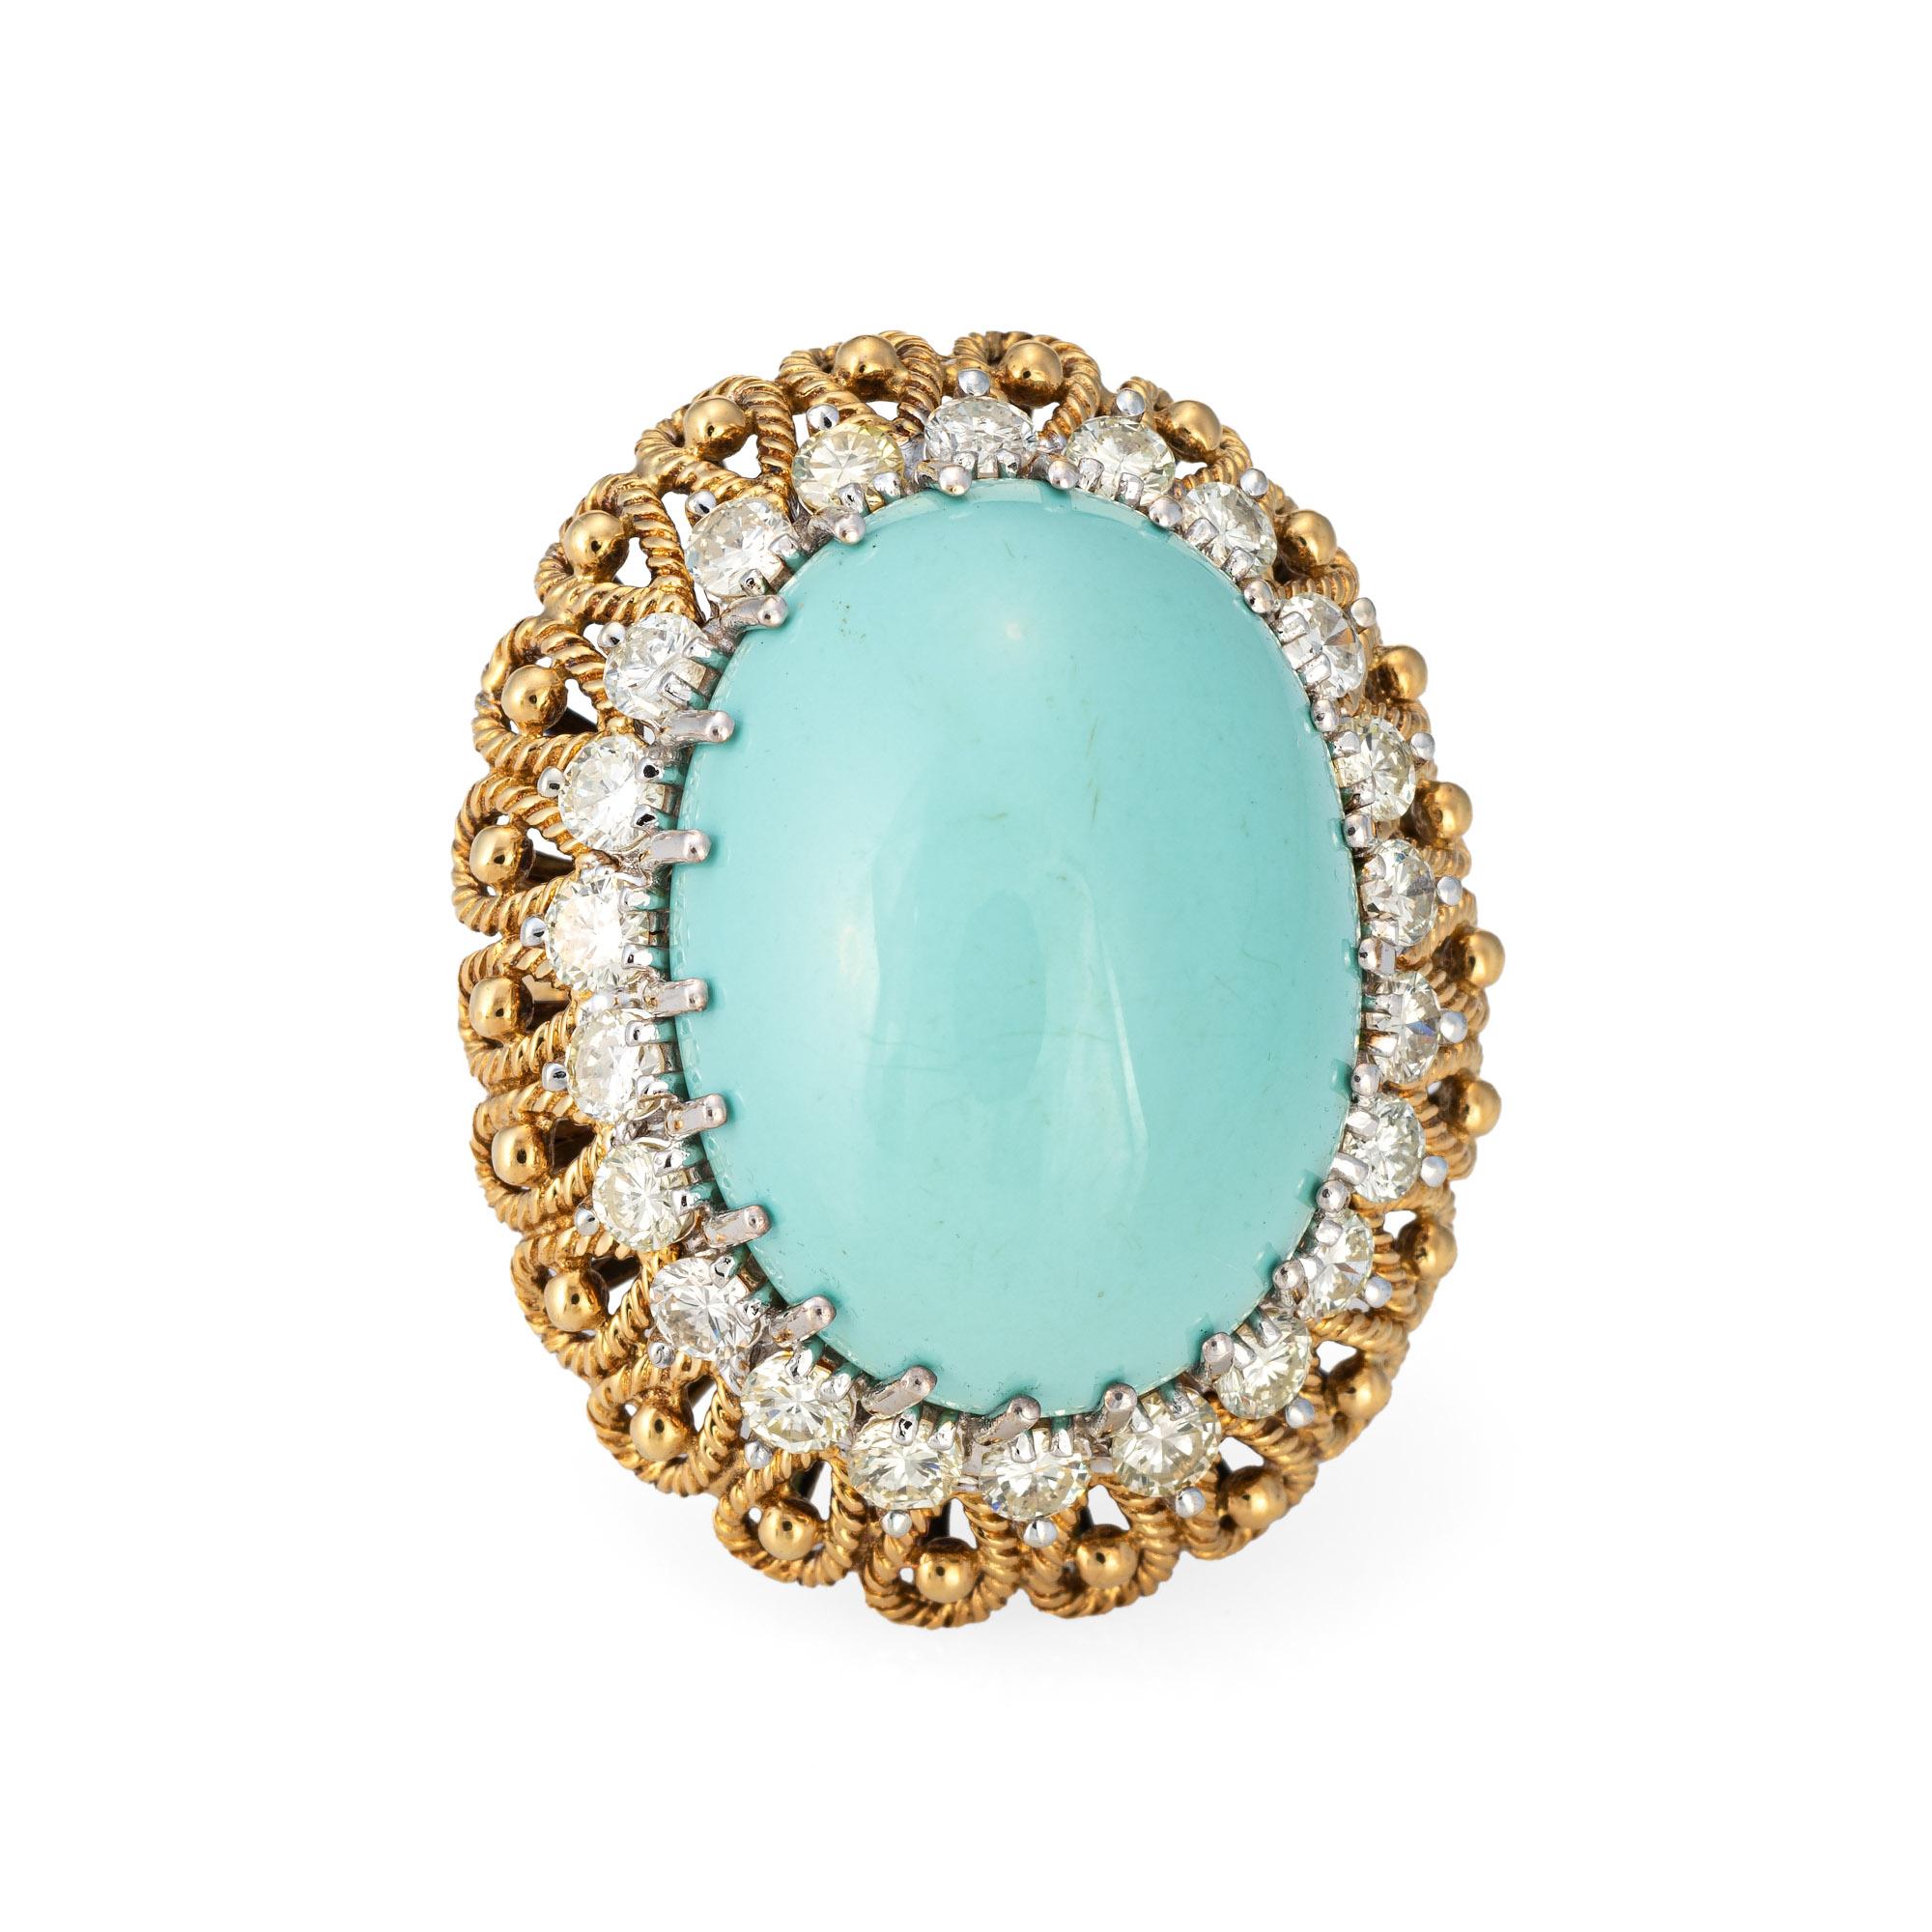 Stylish vintage turquoise & diamond cocktail ring (circa 1960s) crafted in 18 karat yellow gold. 

Cabochon cut turquoise measures 20mm x 14mm. 22 round brilliant cut diamonds total an estimated 0.90 carats (estimated at I-J-K color and VS2-I1